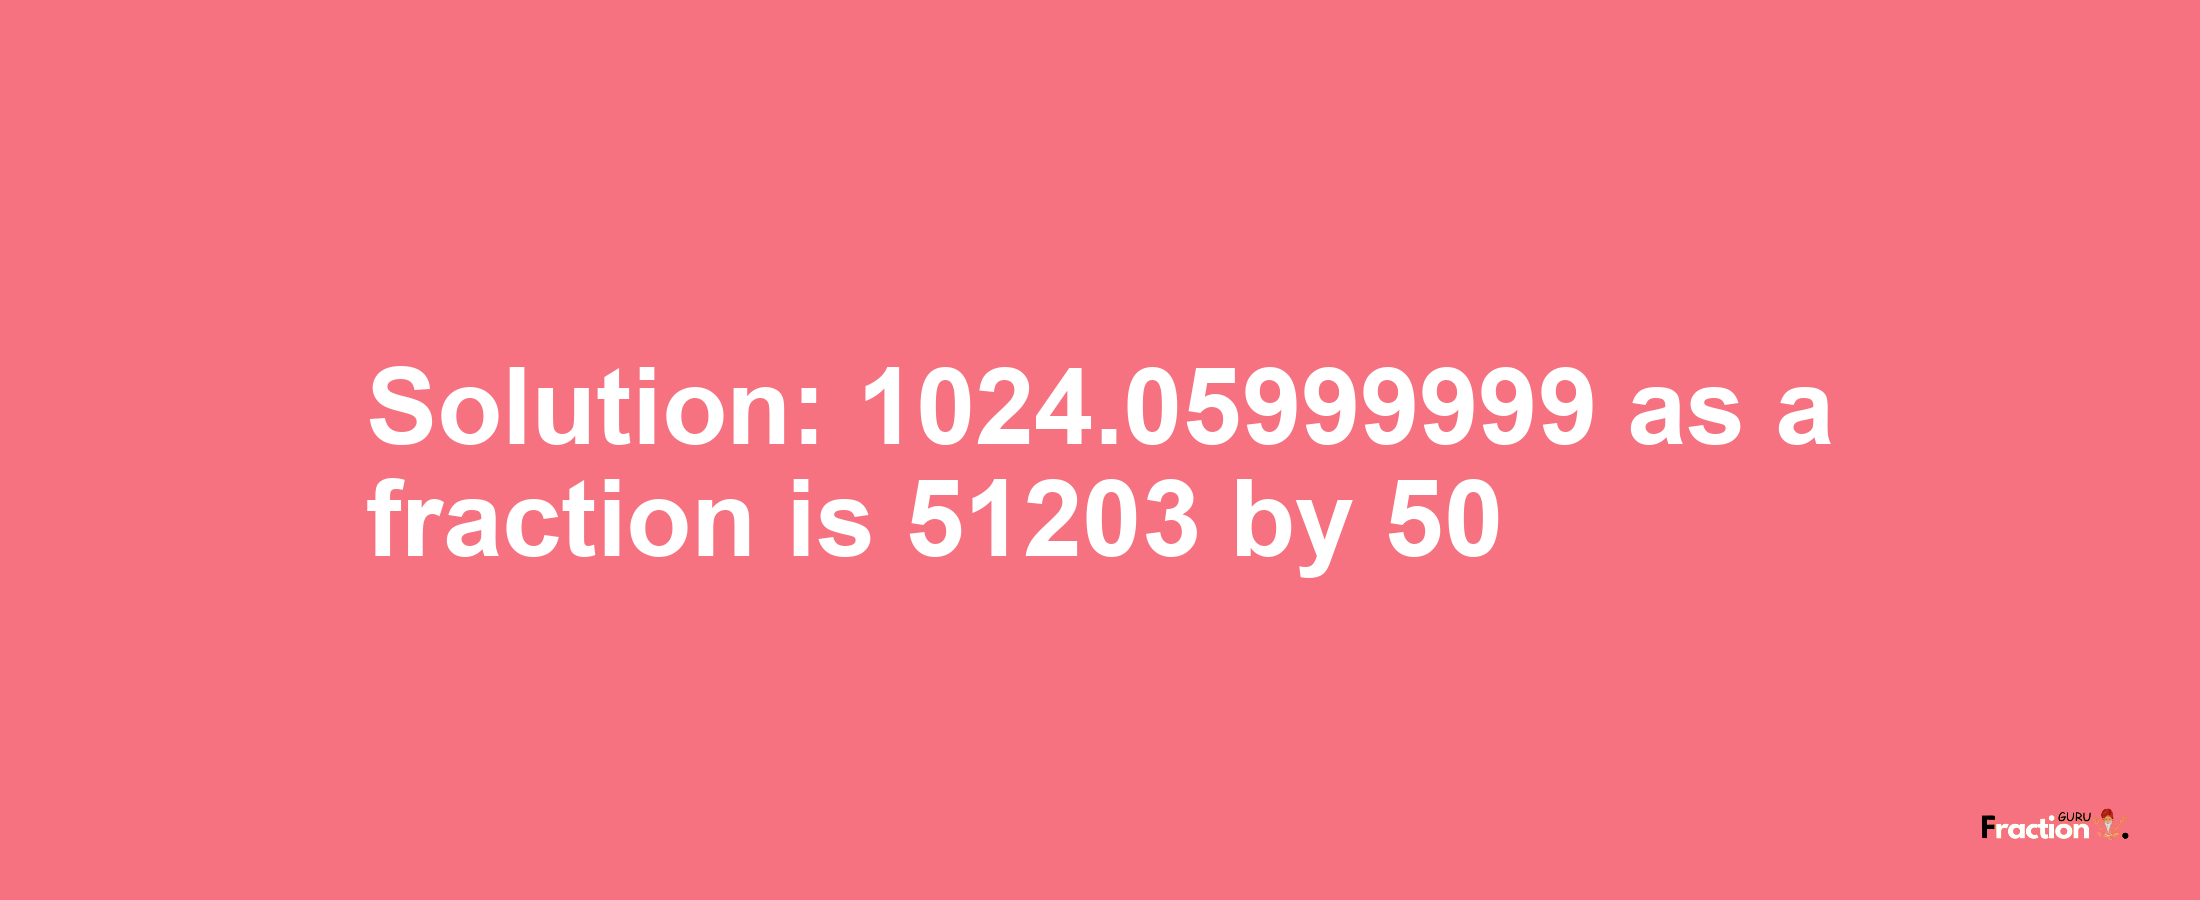 Solution:1024.05999999 as a fraction is 51203/50